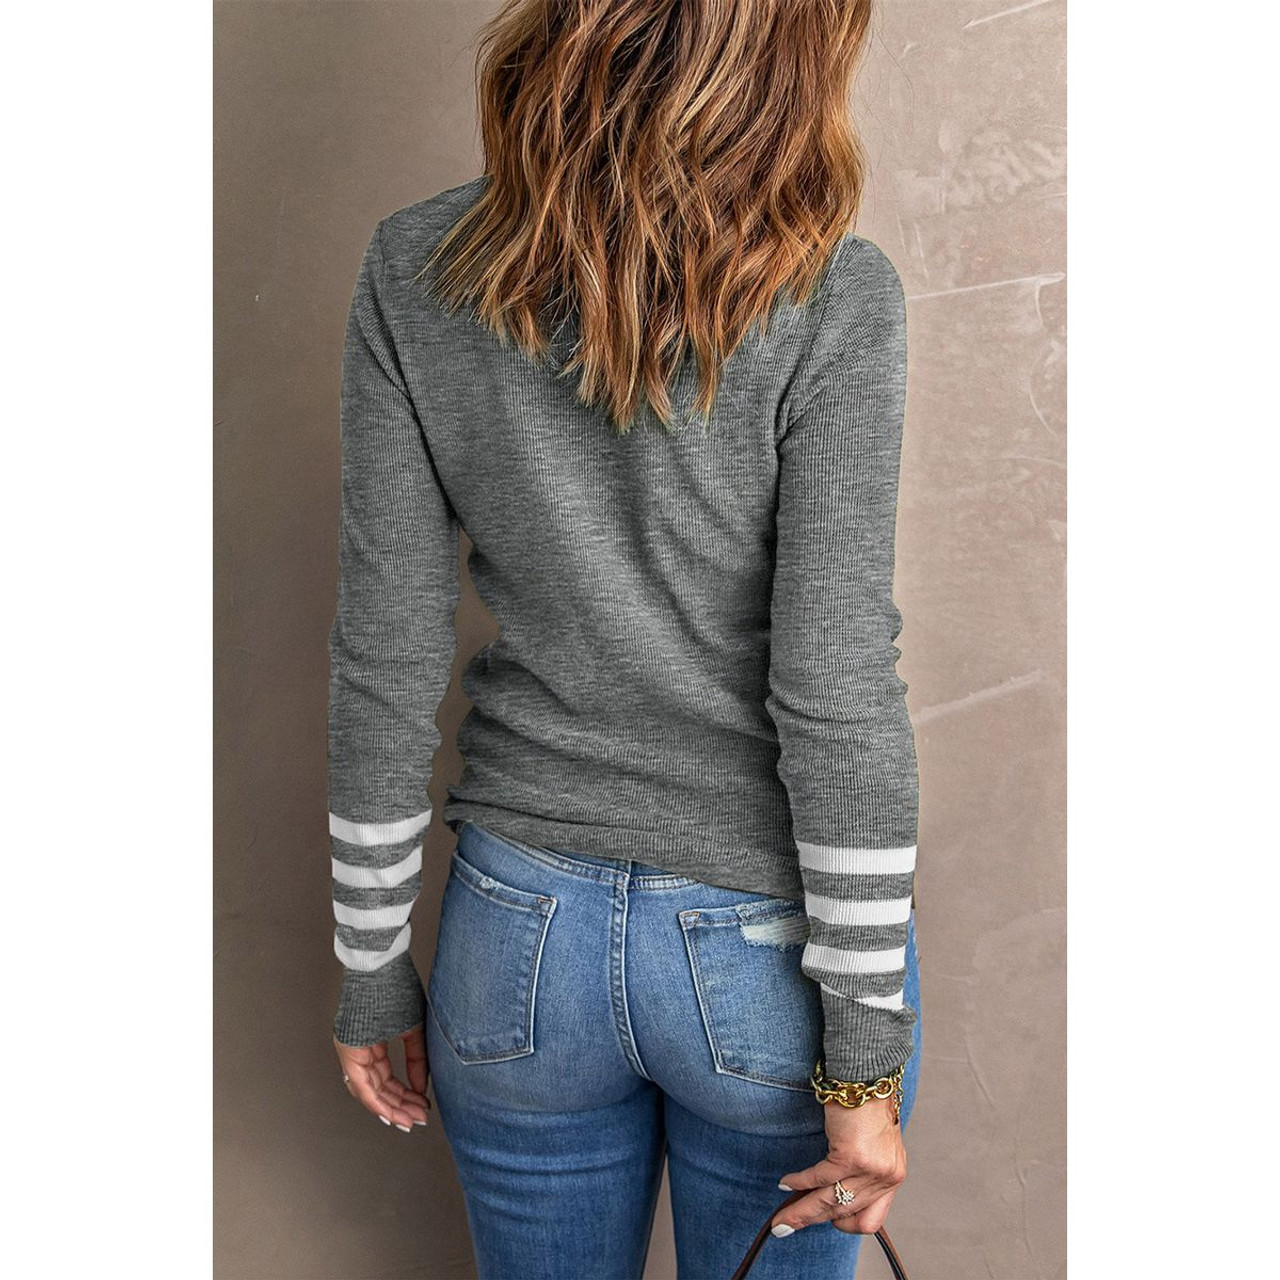 Women's Striped Sleeve Knit Sweater product image